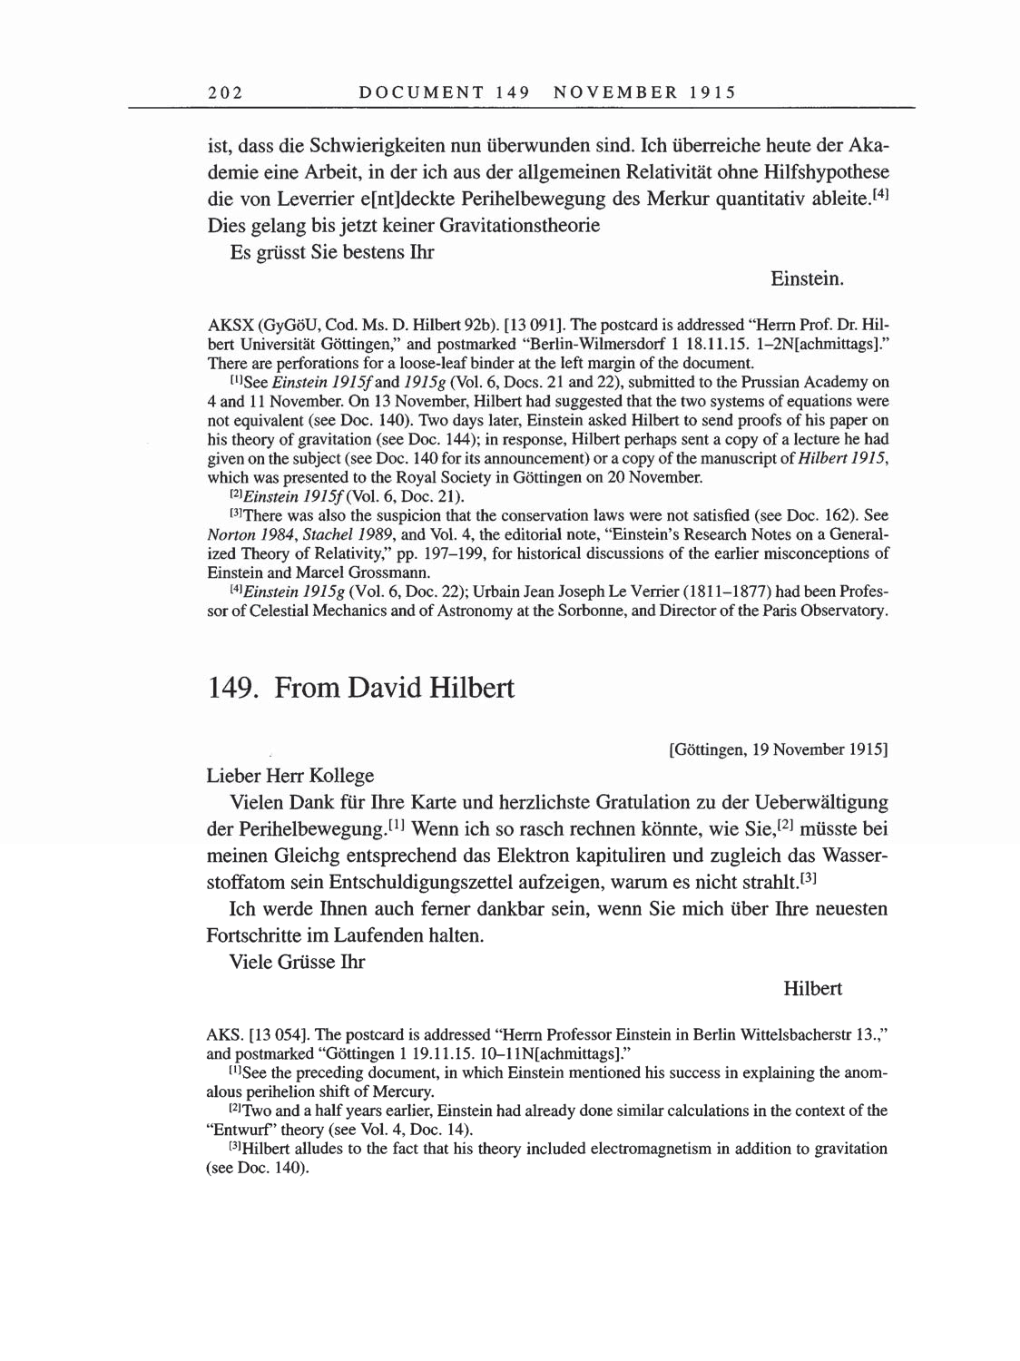 Volume 8, Part A: The Berlin Years: Correspondence 1914-1917 page 202